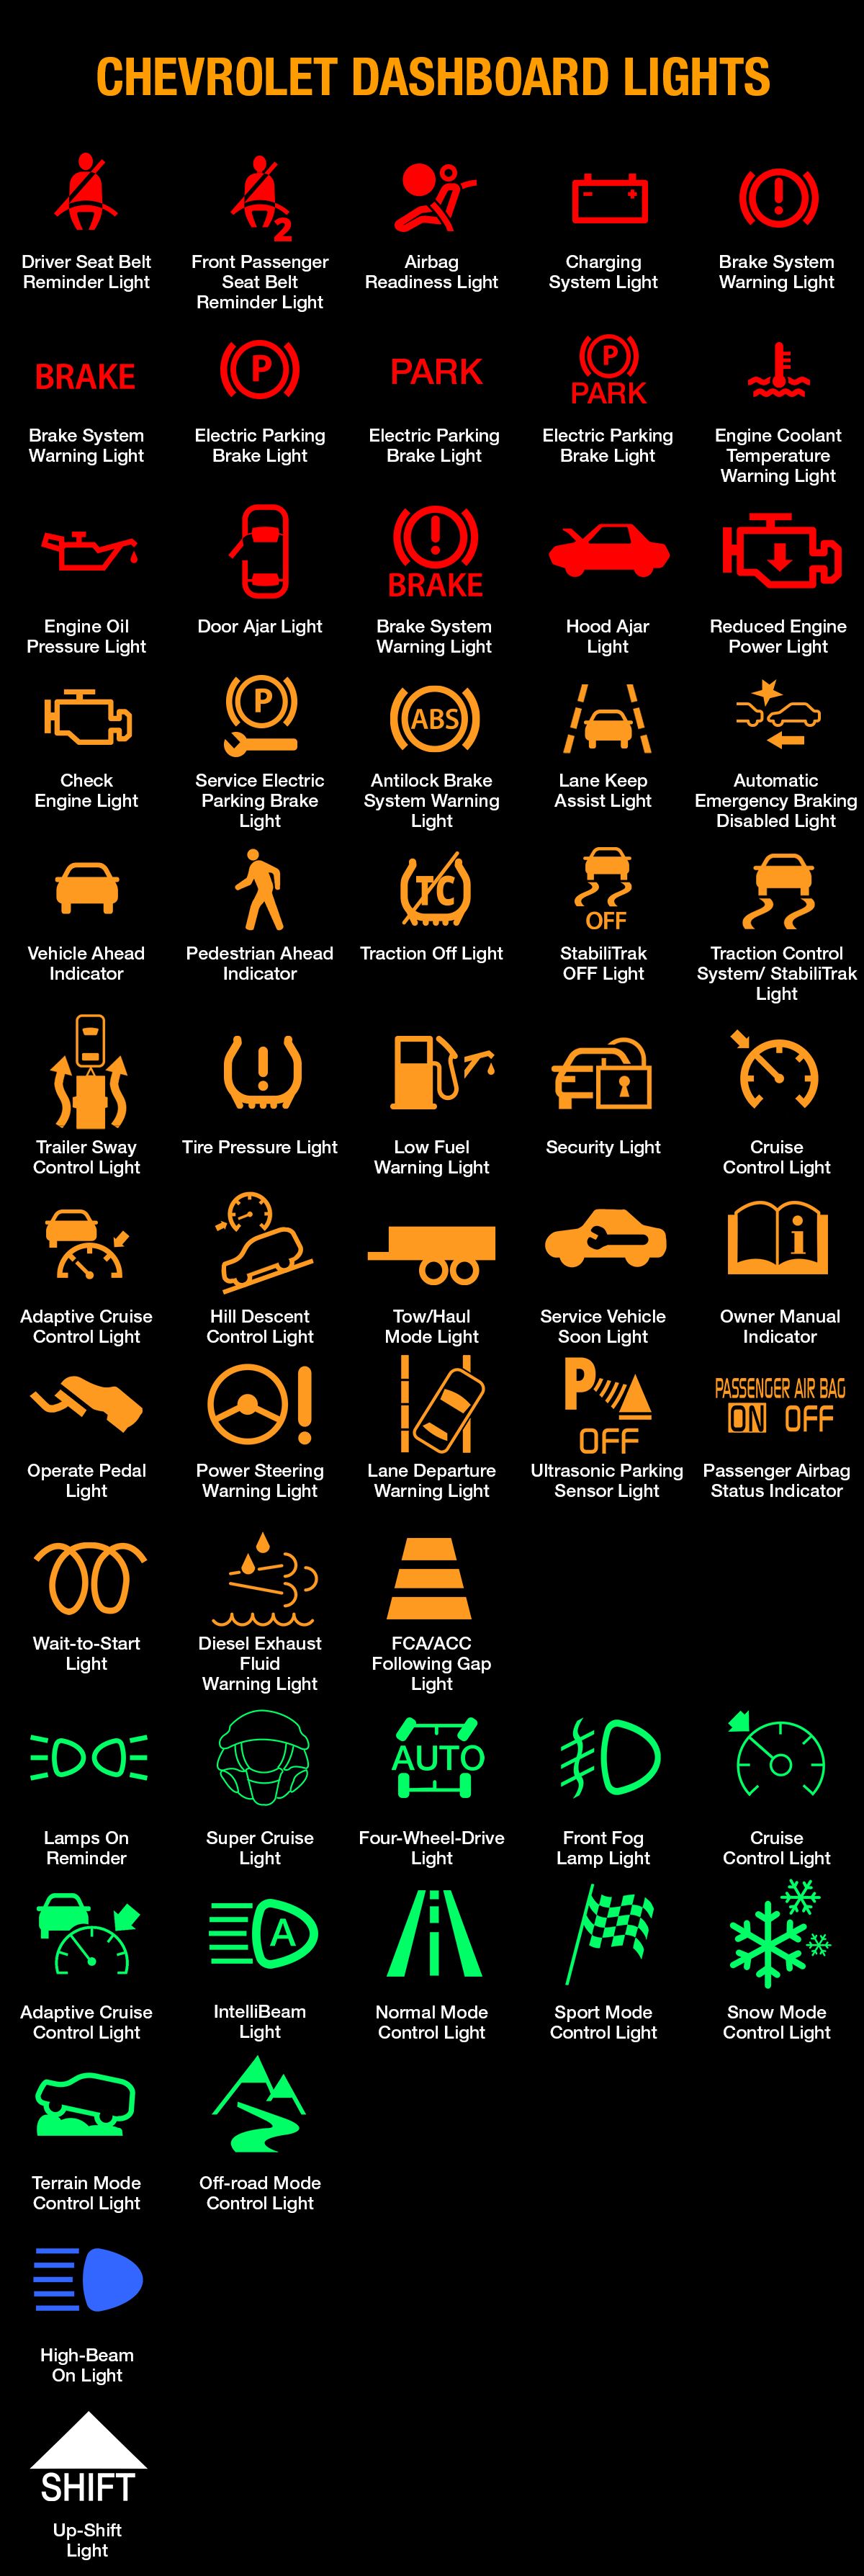 Chevy Dashboard Symbols and Meanings (FULL List, FREE Download) OBD